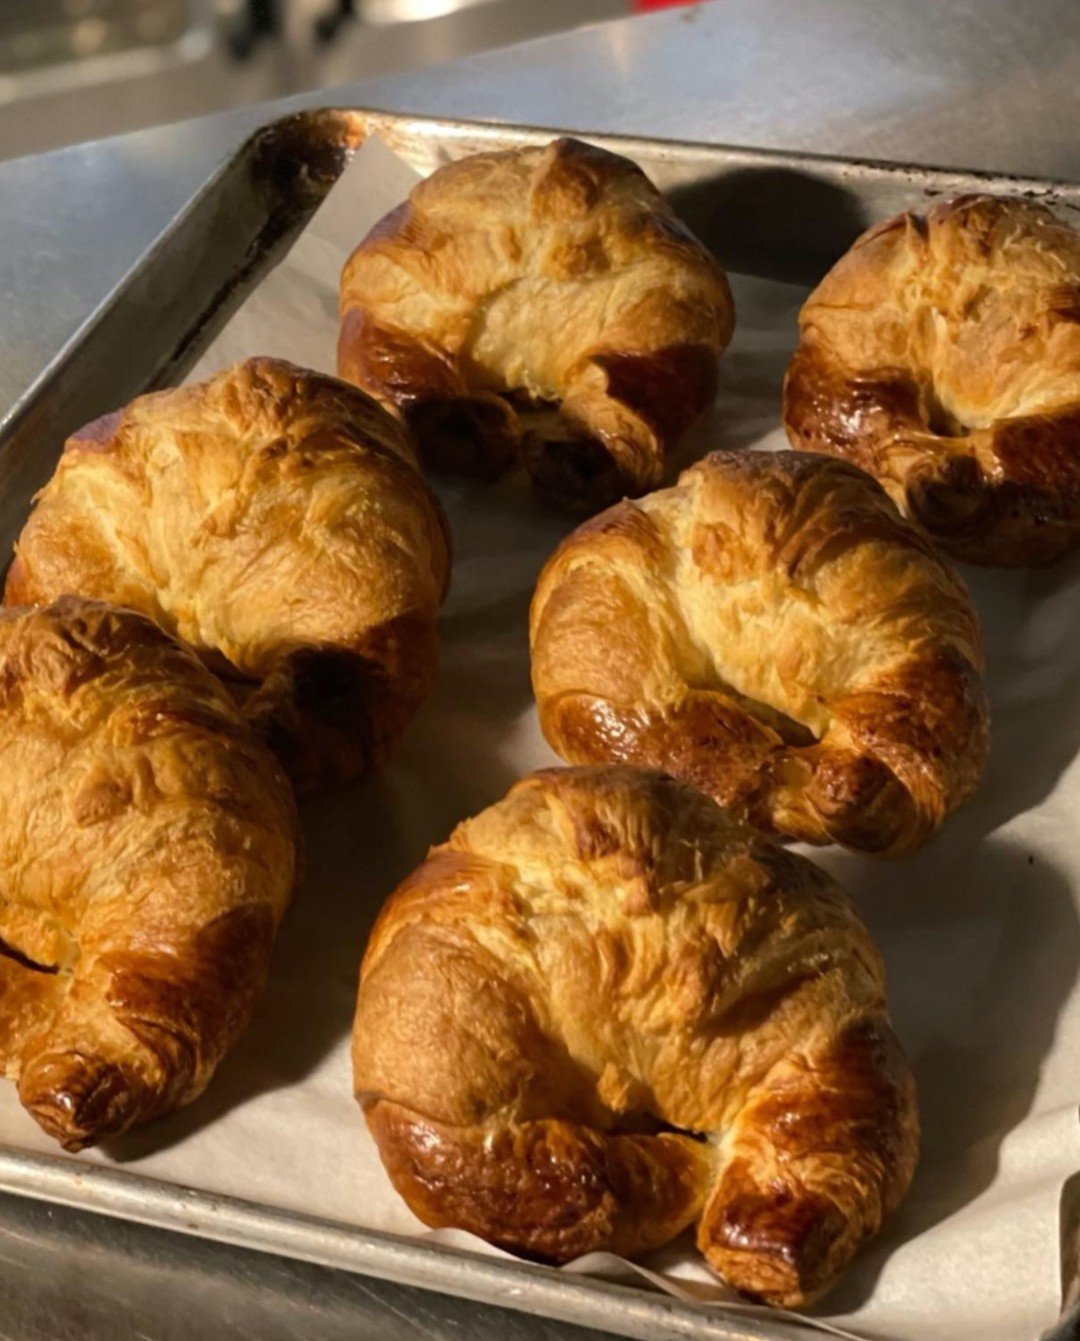 Life&rsquo;s simple pleasures: freshly baked croissants 🥐

Each bite is a delicious blend of buttery flakiness and subtle sweetness! Do you love croissants as much as we do?

#primrosecafe #primrose #albanynycafe #freshlybakedcroissants #upstatenyca